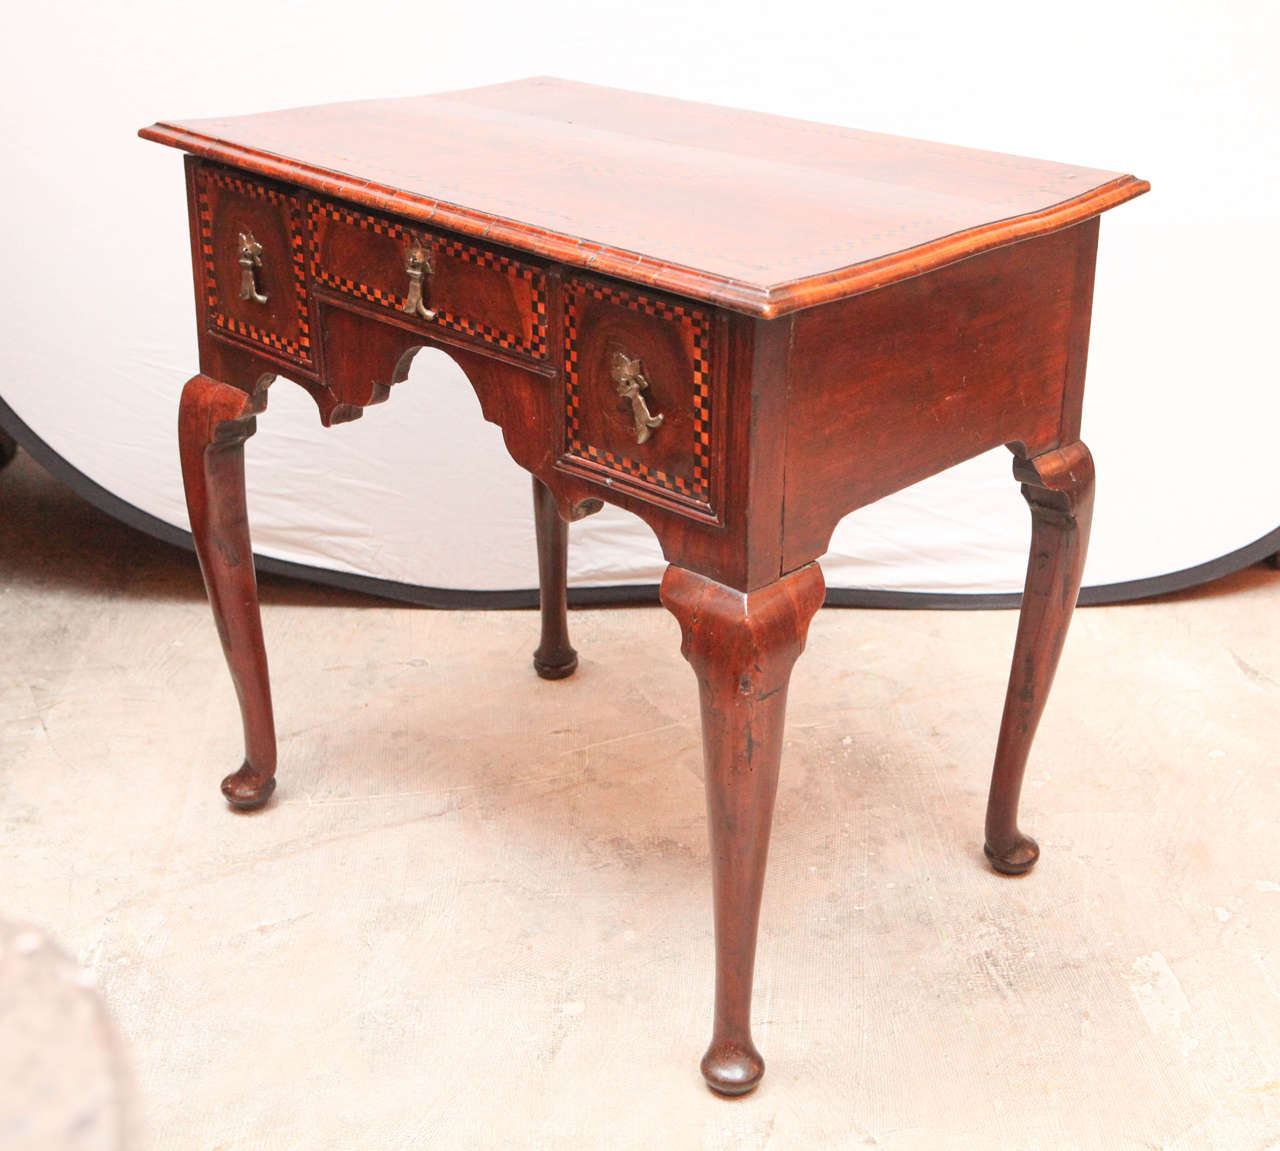 Early 19th century English inlaid three-drawer walnut low boy end table with satinwood and mahogany inlays.